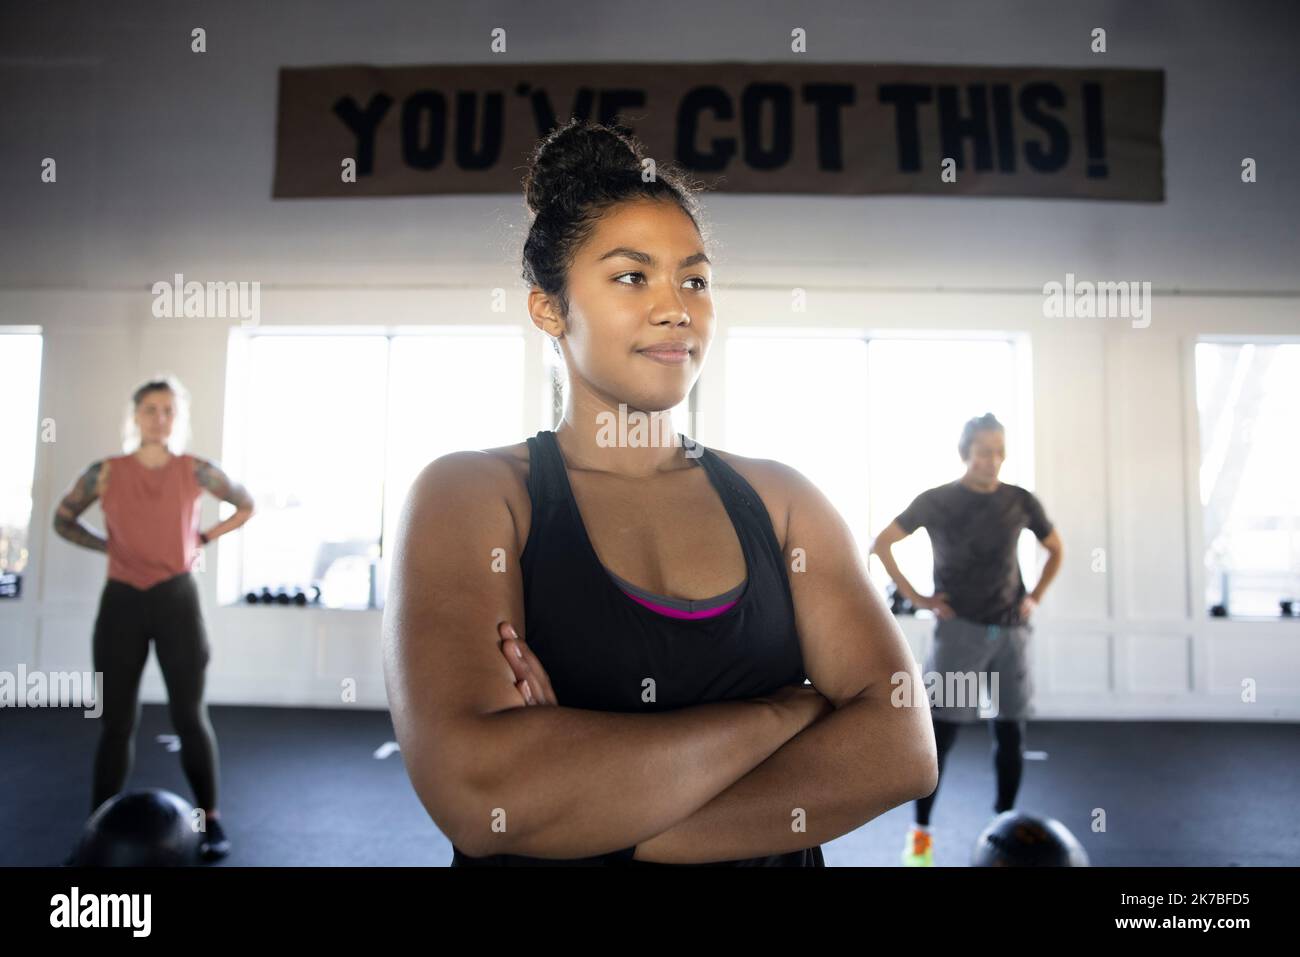 Portrait confident determined young woman in group fitness class Stock Photo